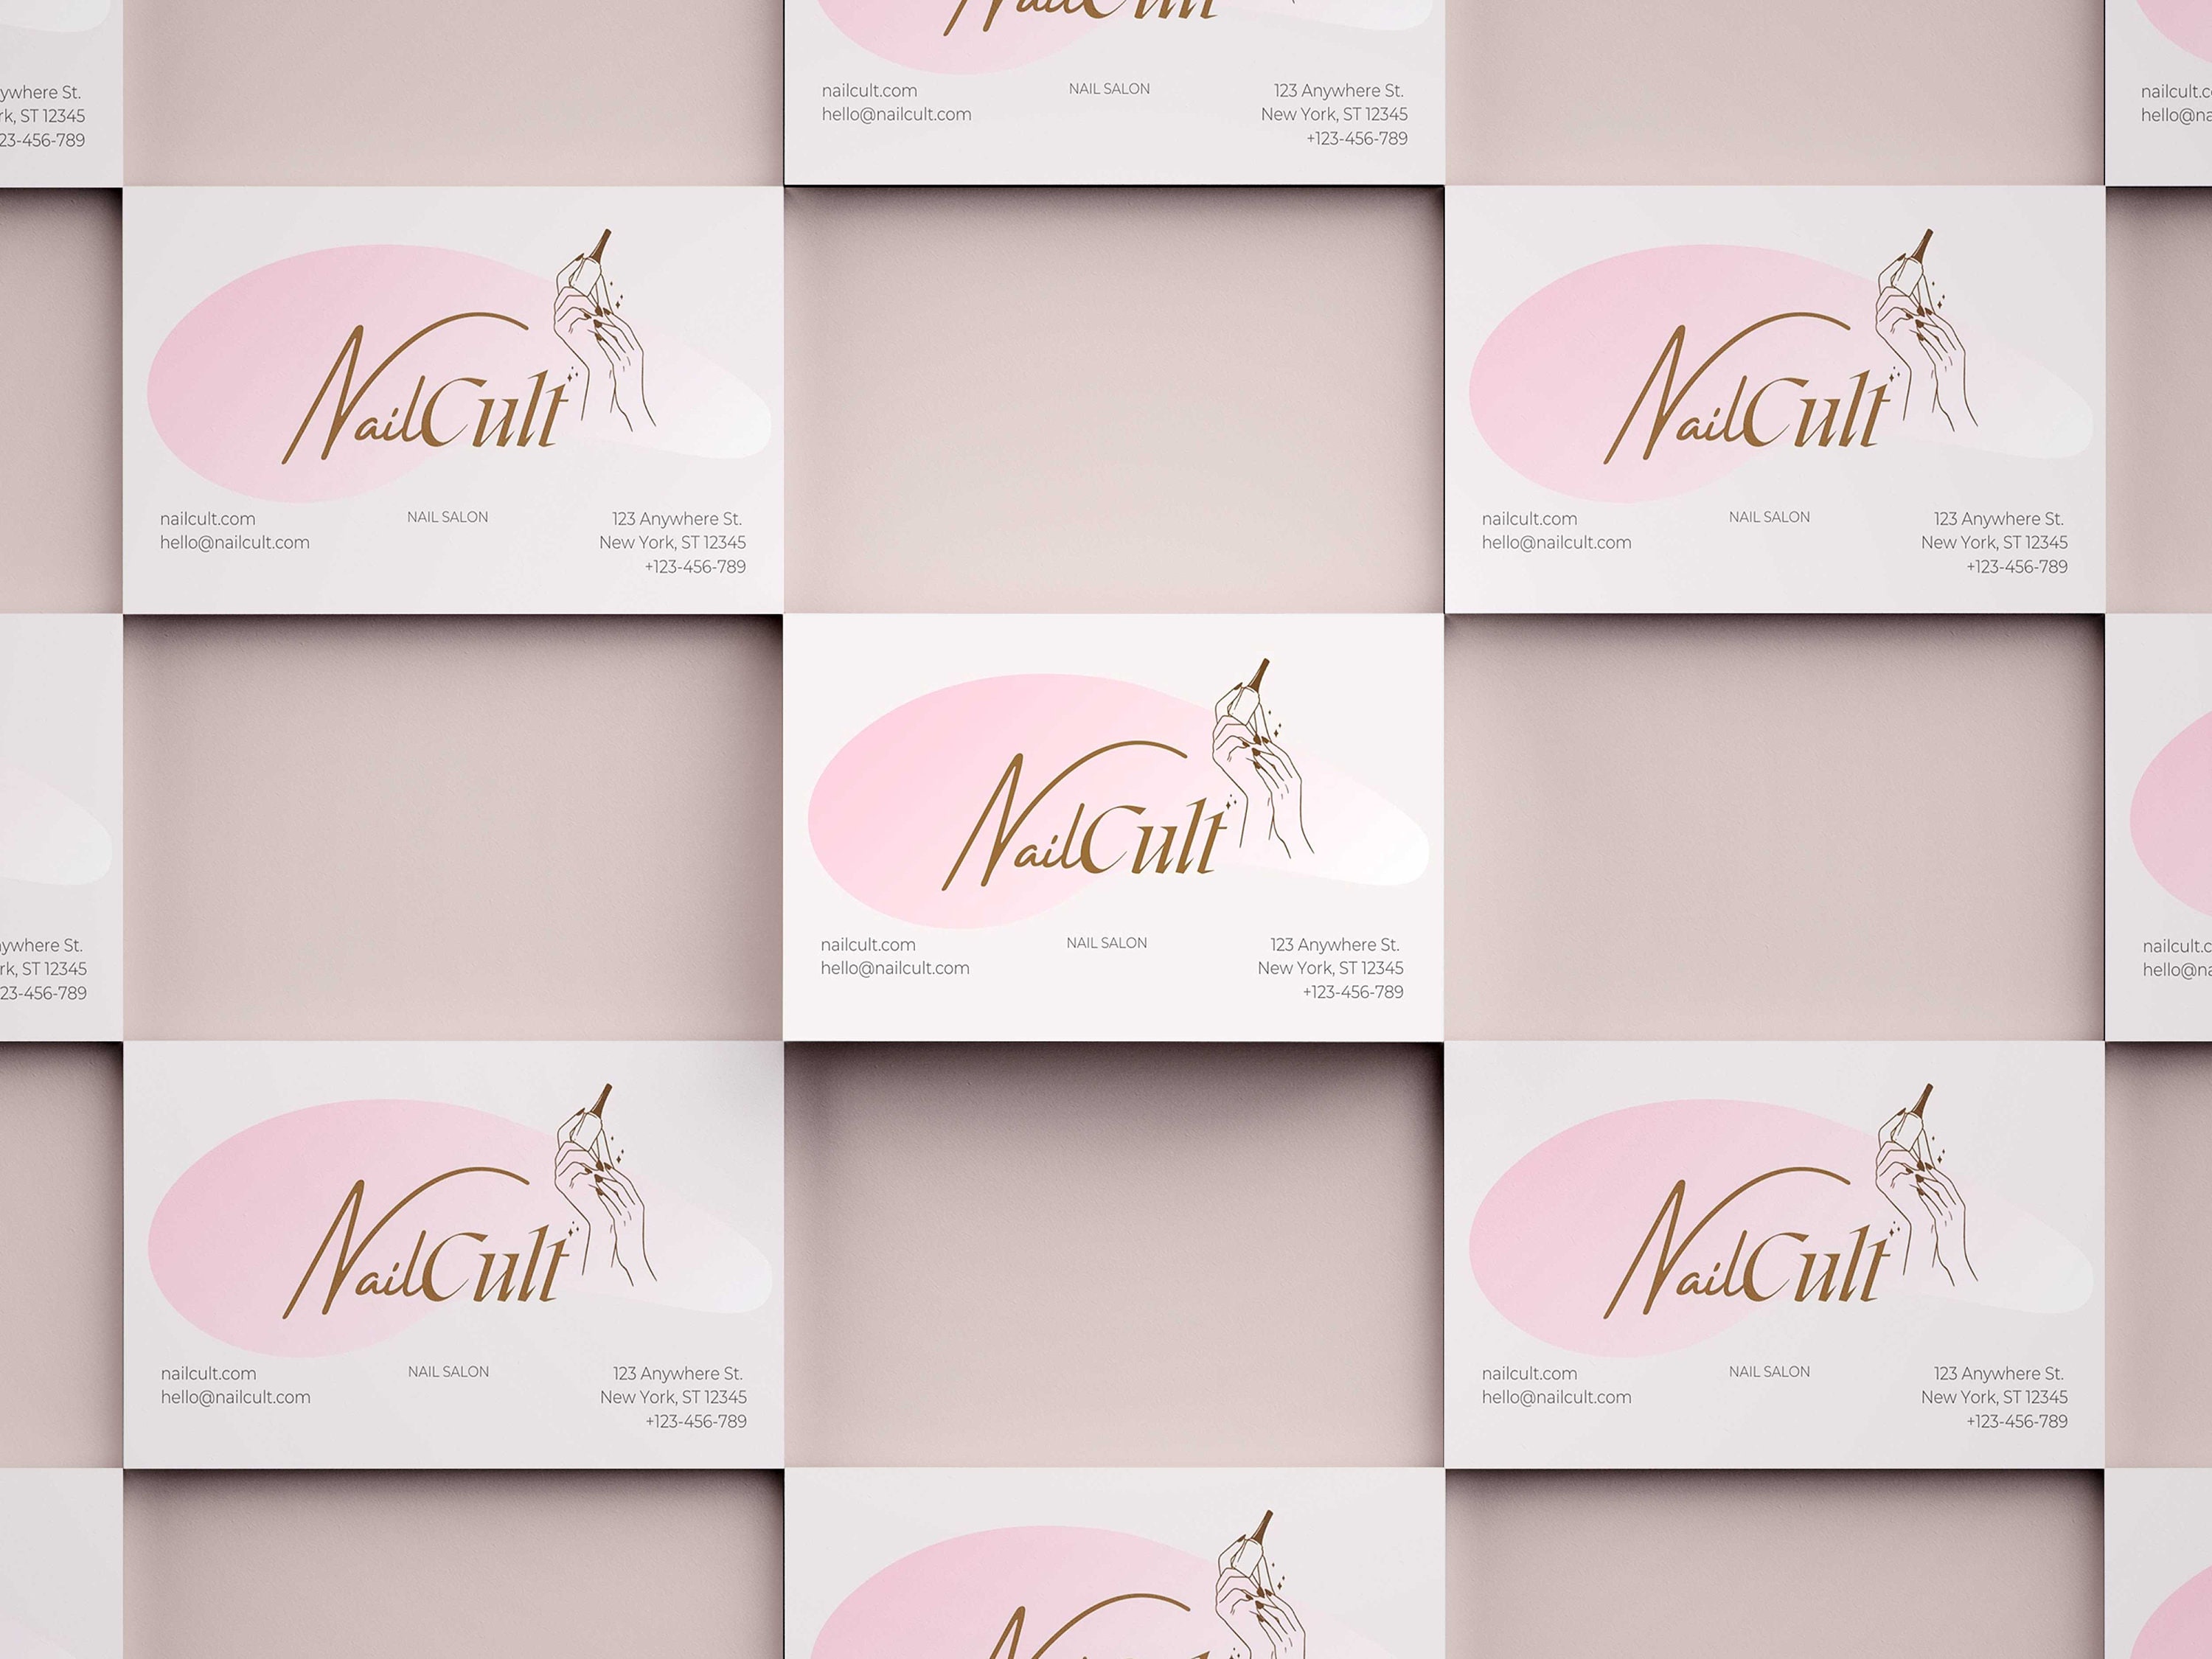 3. Elegant Nail Business Card Templates - wide 3